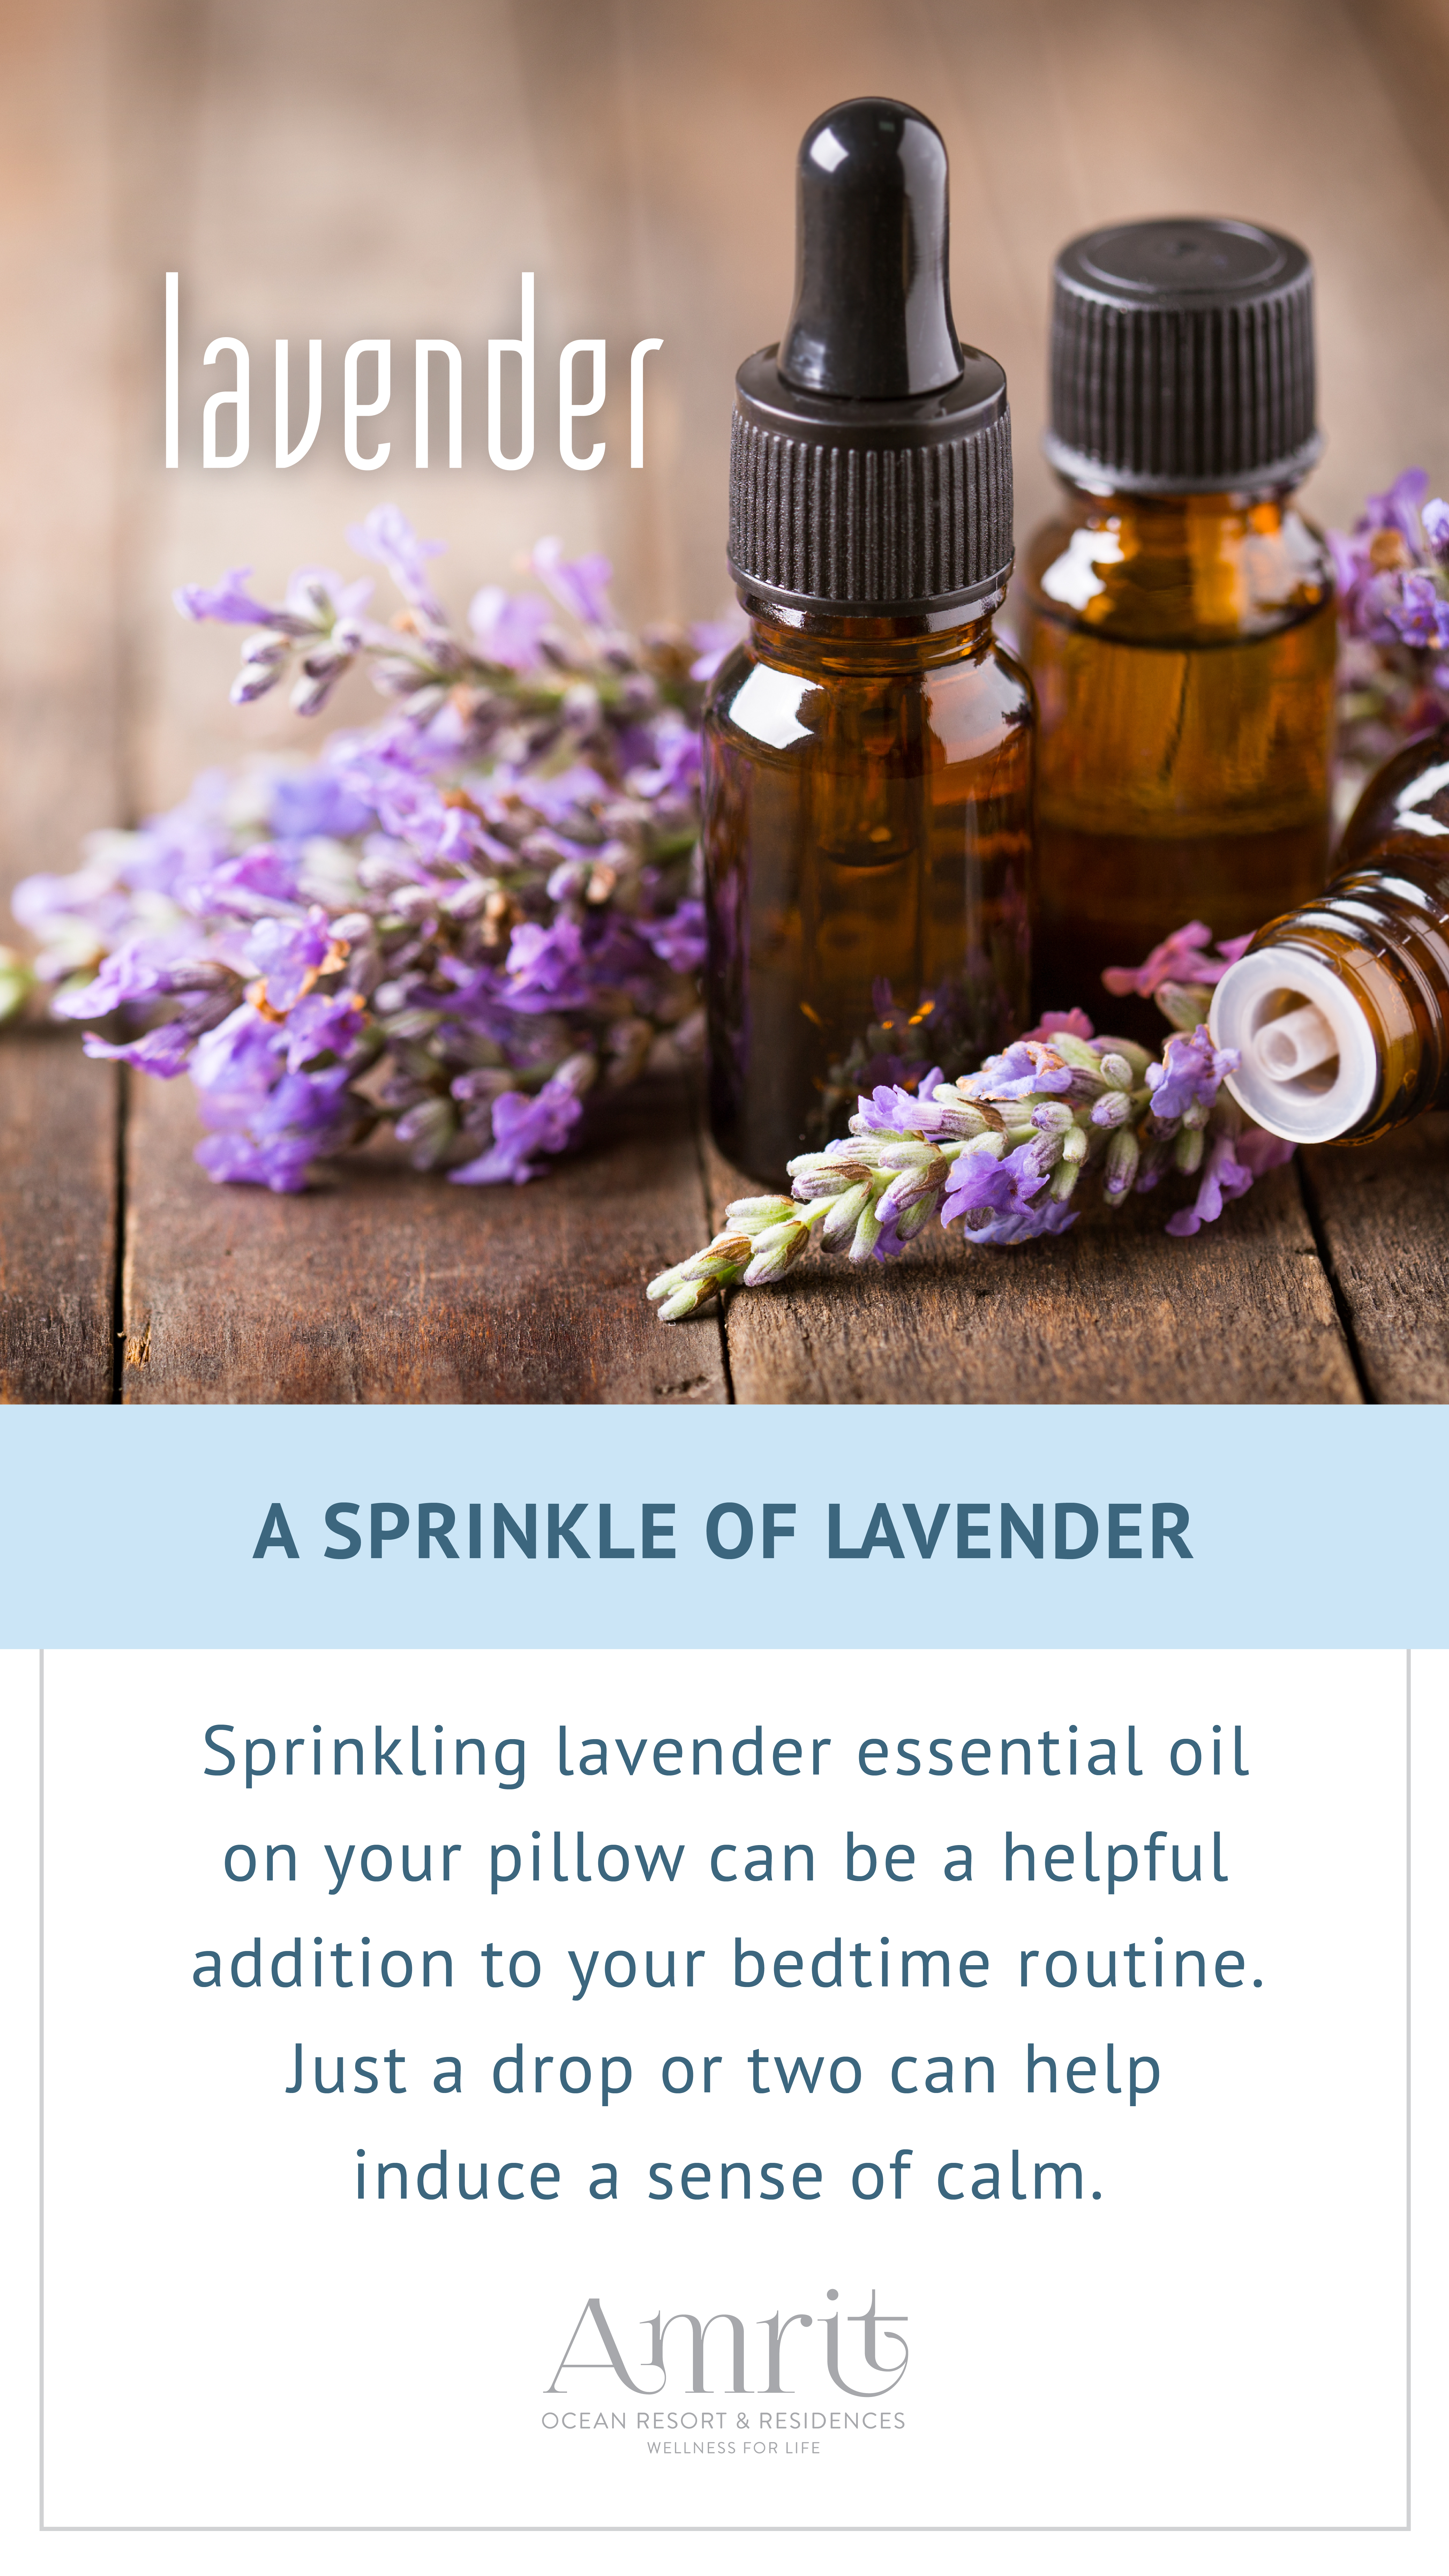 Sprinkling lavender essential oil on your pillow can be a helpful addition to your bedtime routine.